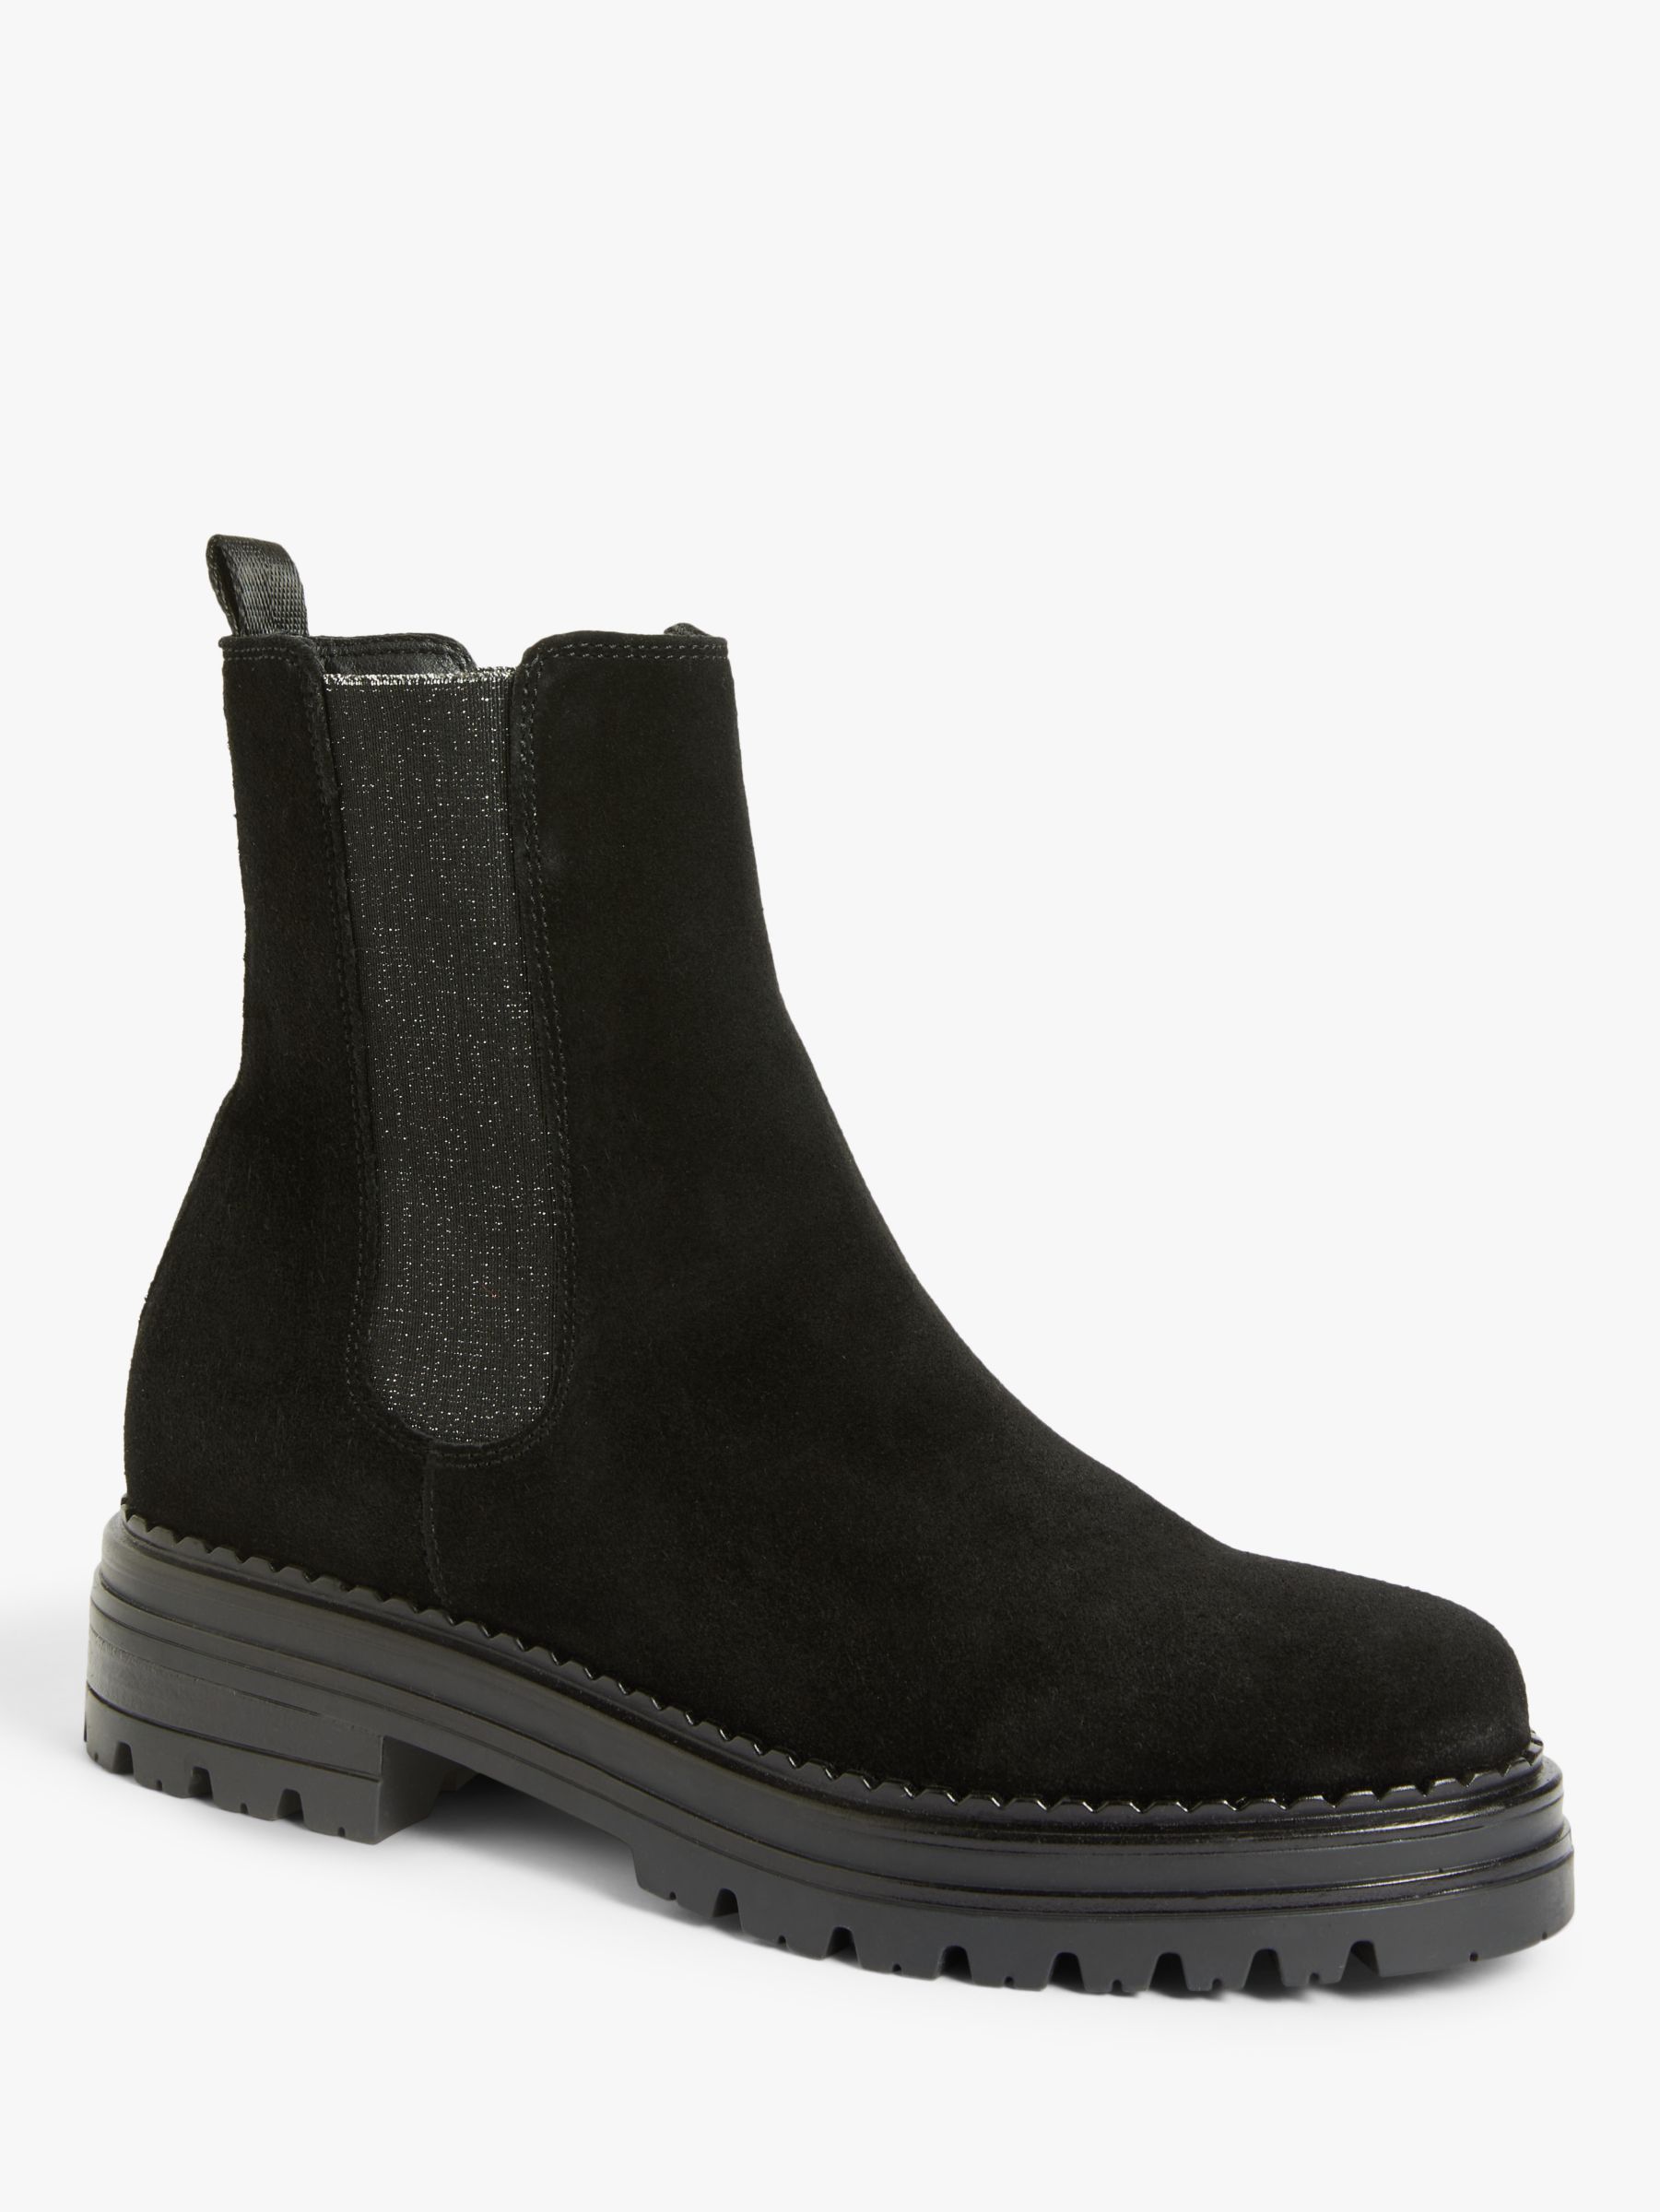 AND/OR Prisha Suede Chunky Chelsea Boots, Black at John Lewis & Partners